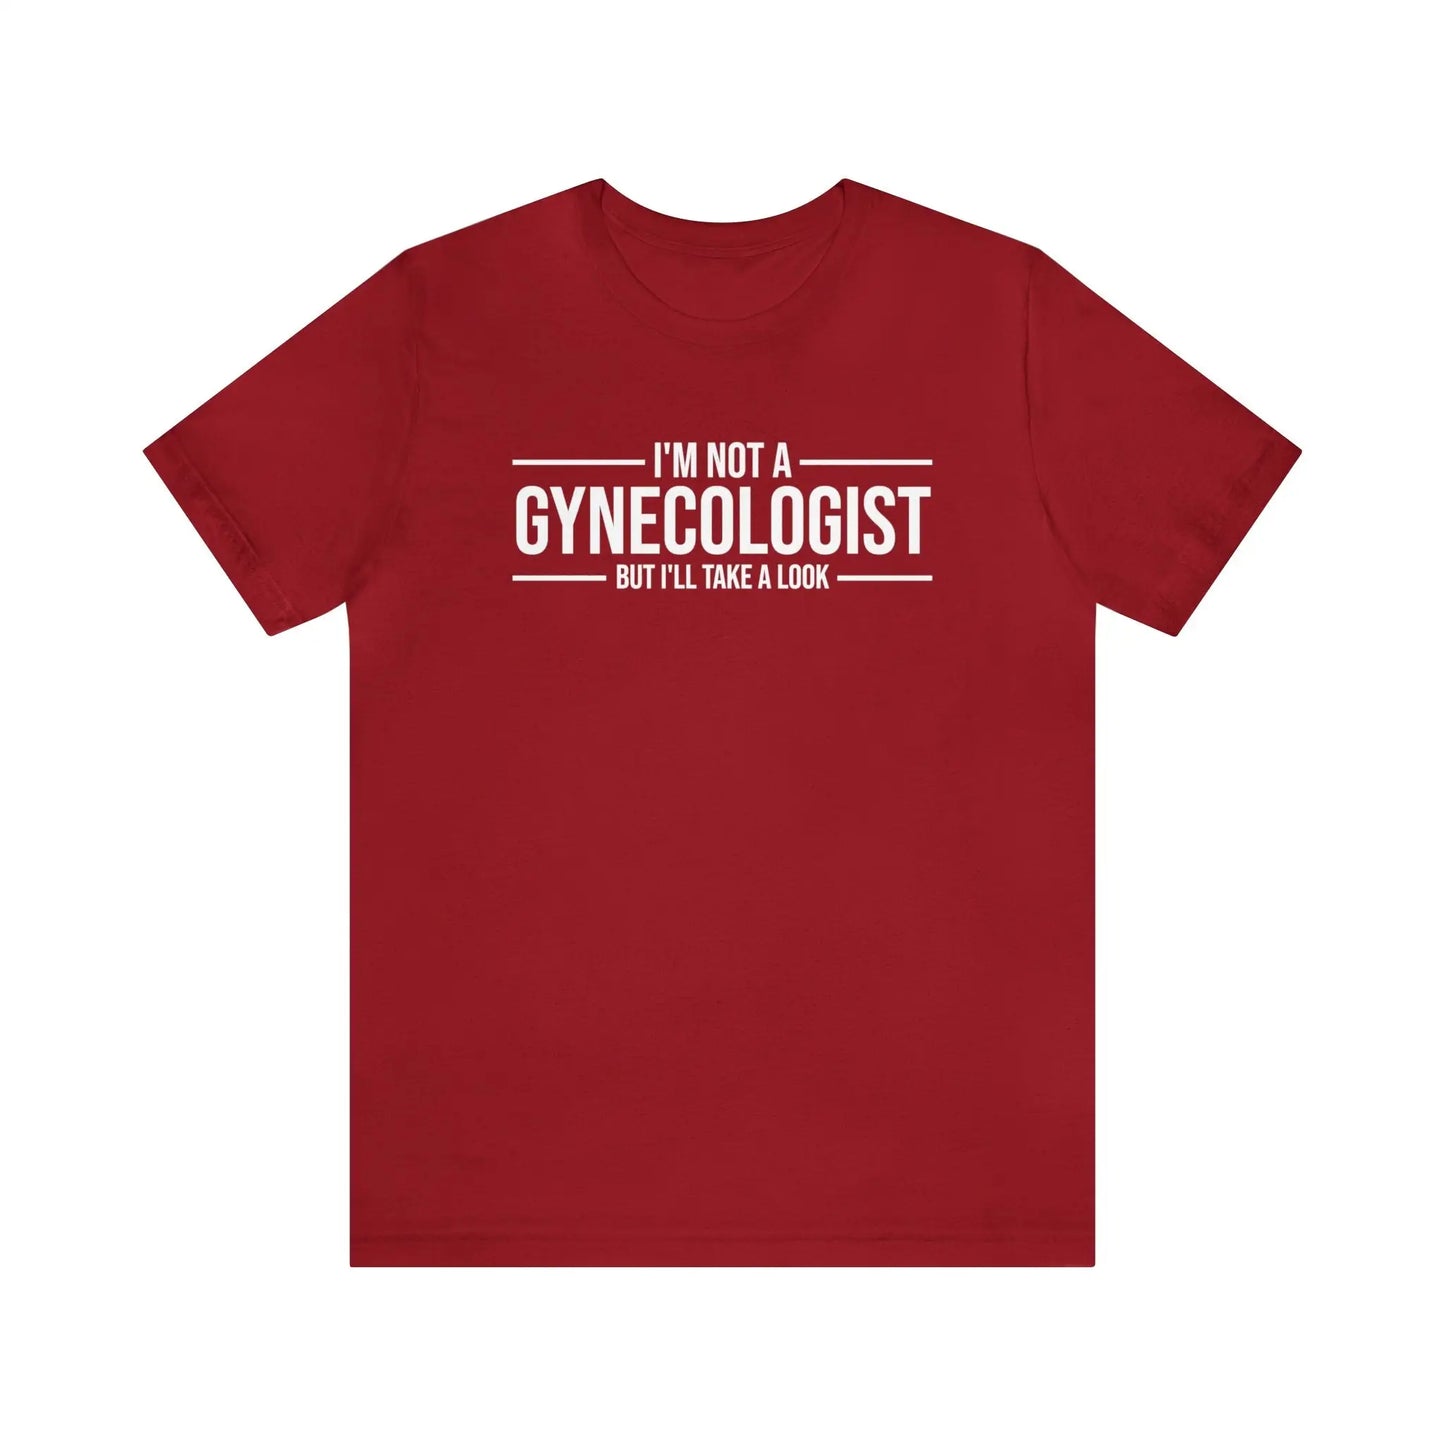 I'm Not A Gynecologist Men's Short Sleeve Tee - Wicked Tees